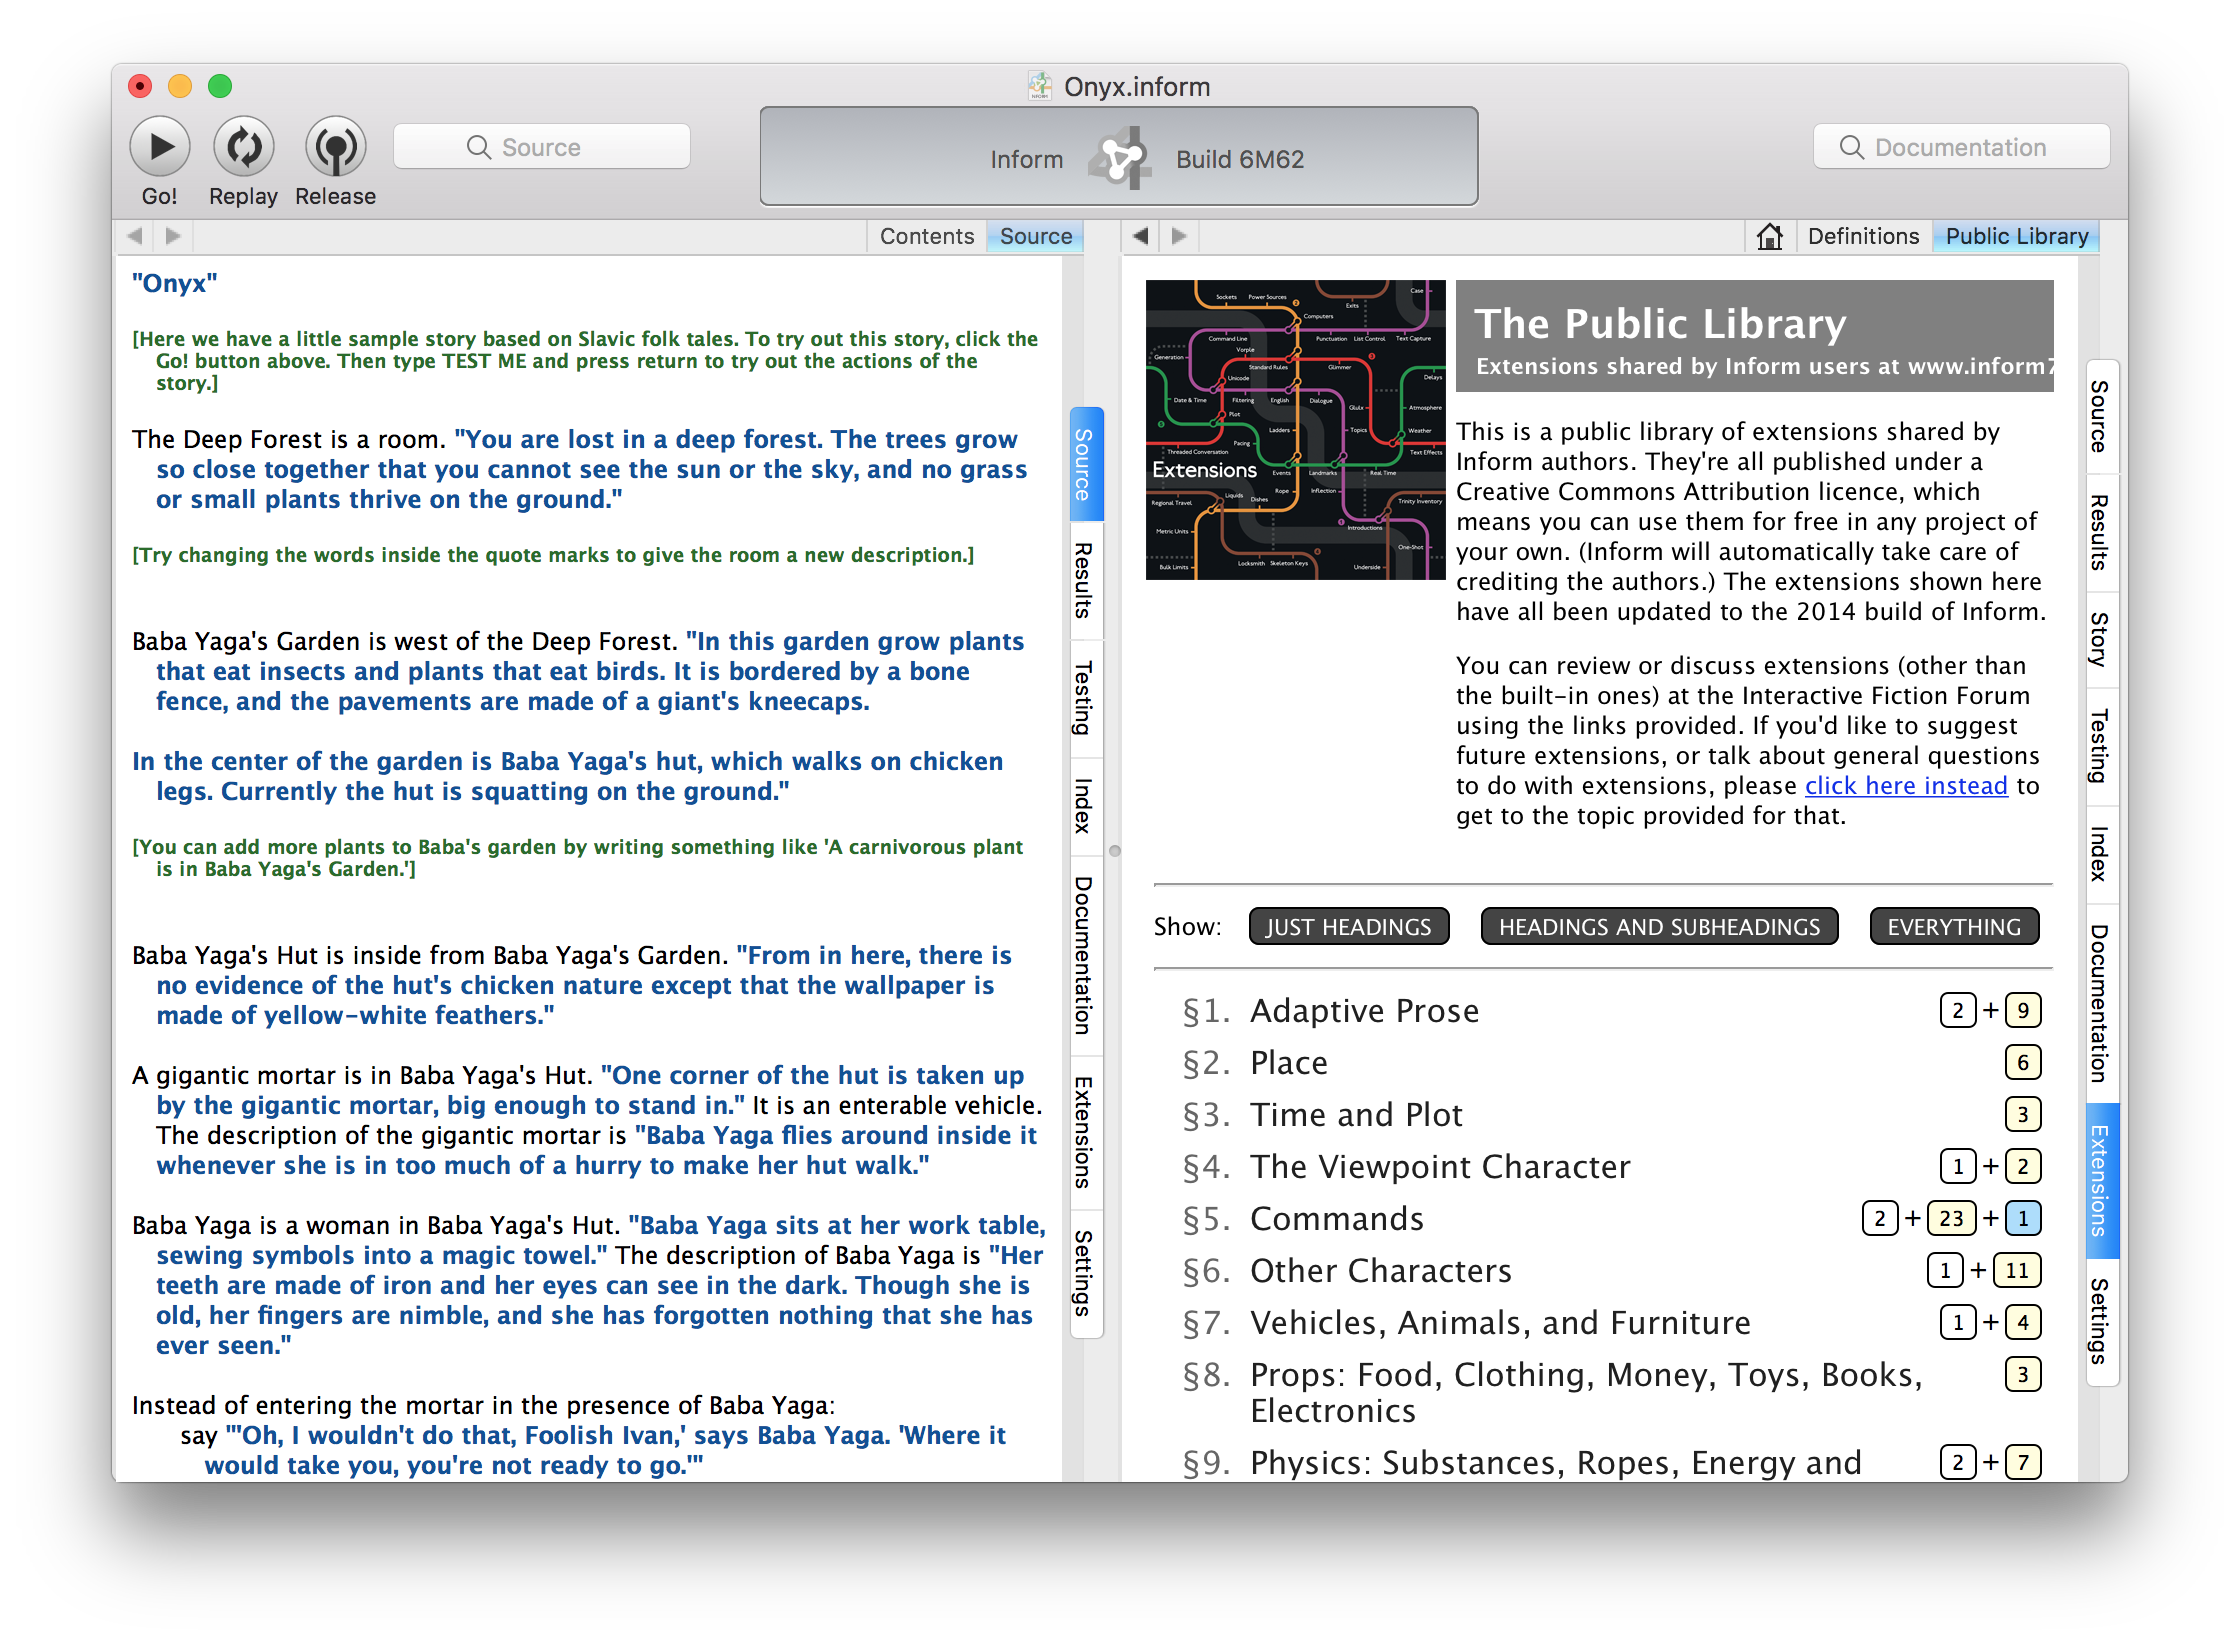 A screenshot of the Inform 7 IDE with the Public Library visible in the rightmost pane.